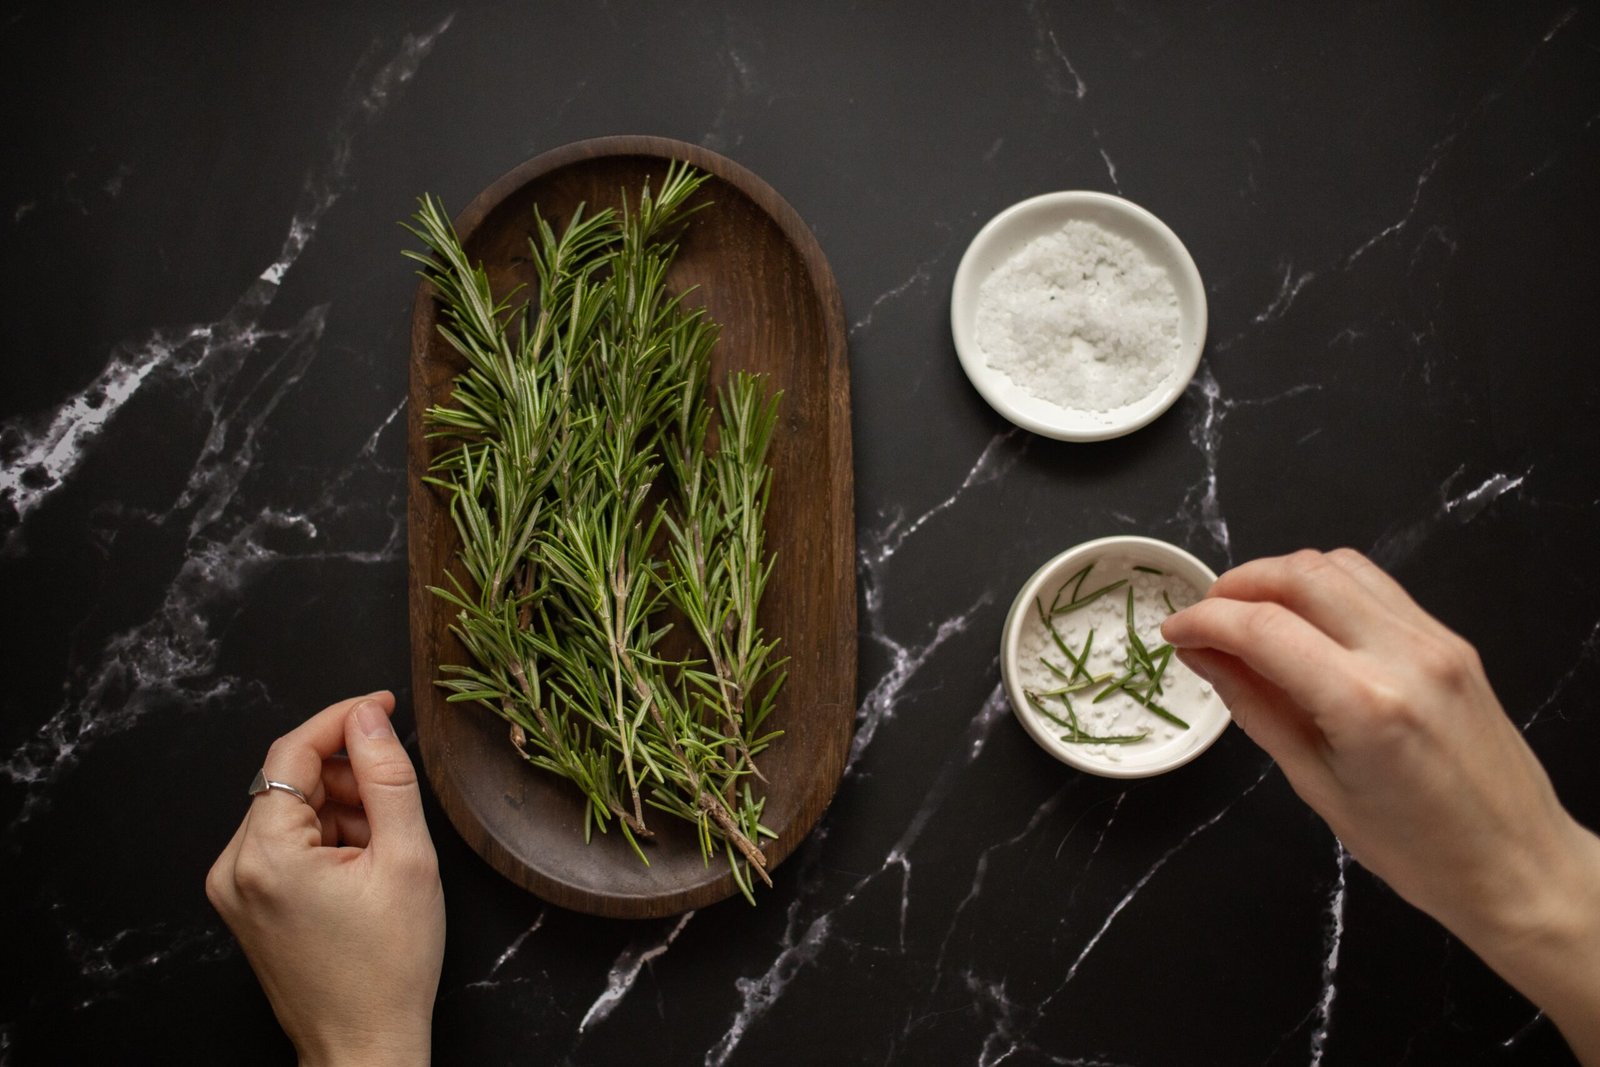 Understanding Herbs: What Exactly is a Sprig of Thyme?